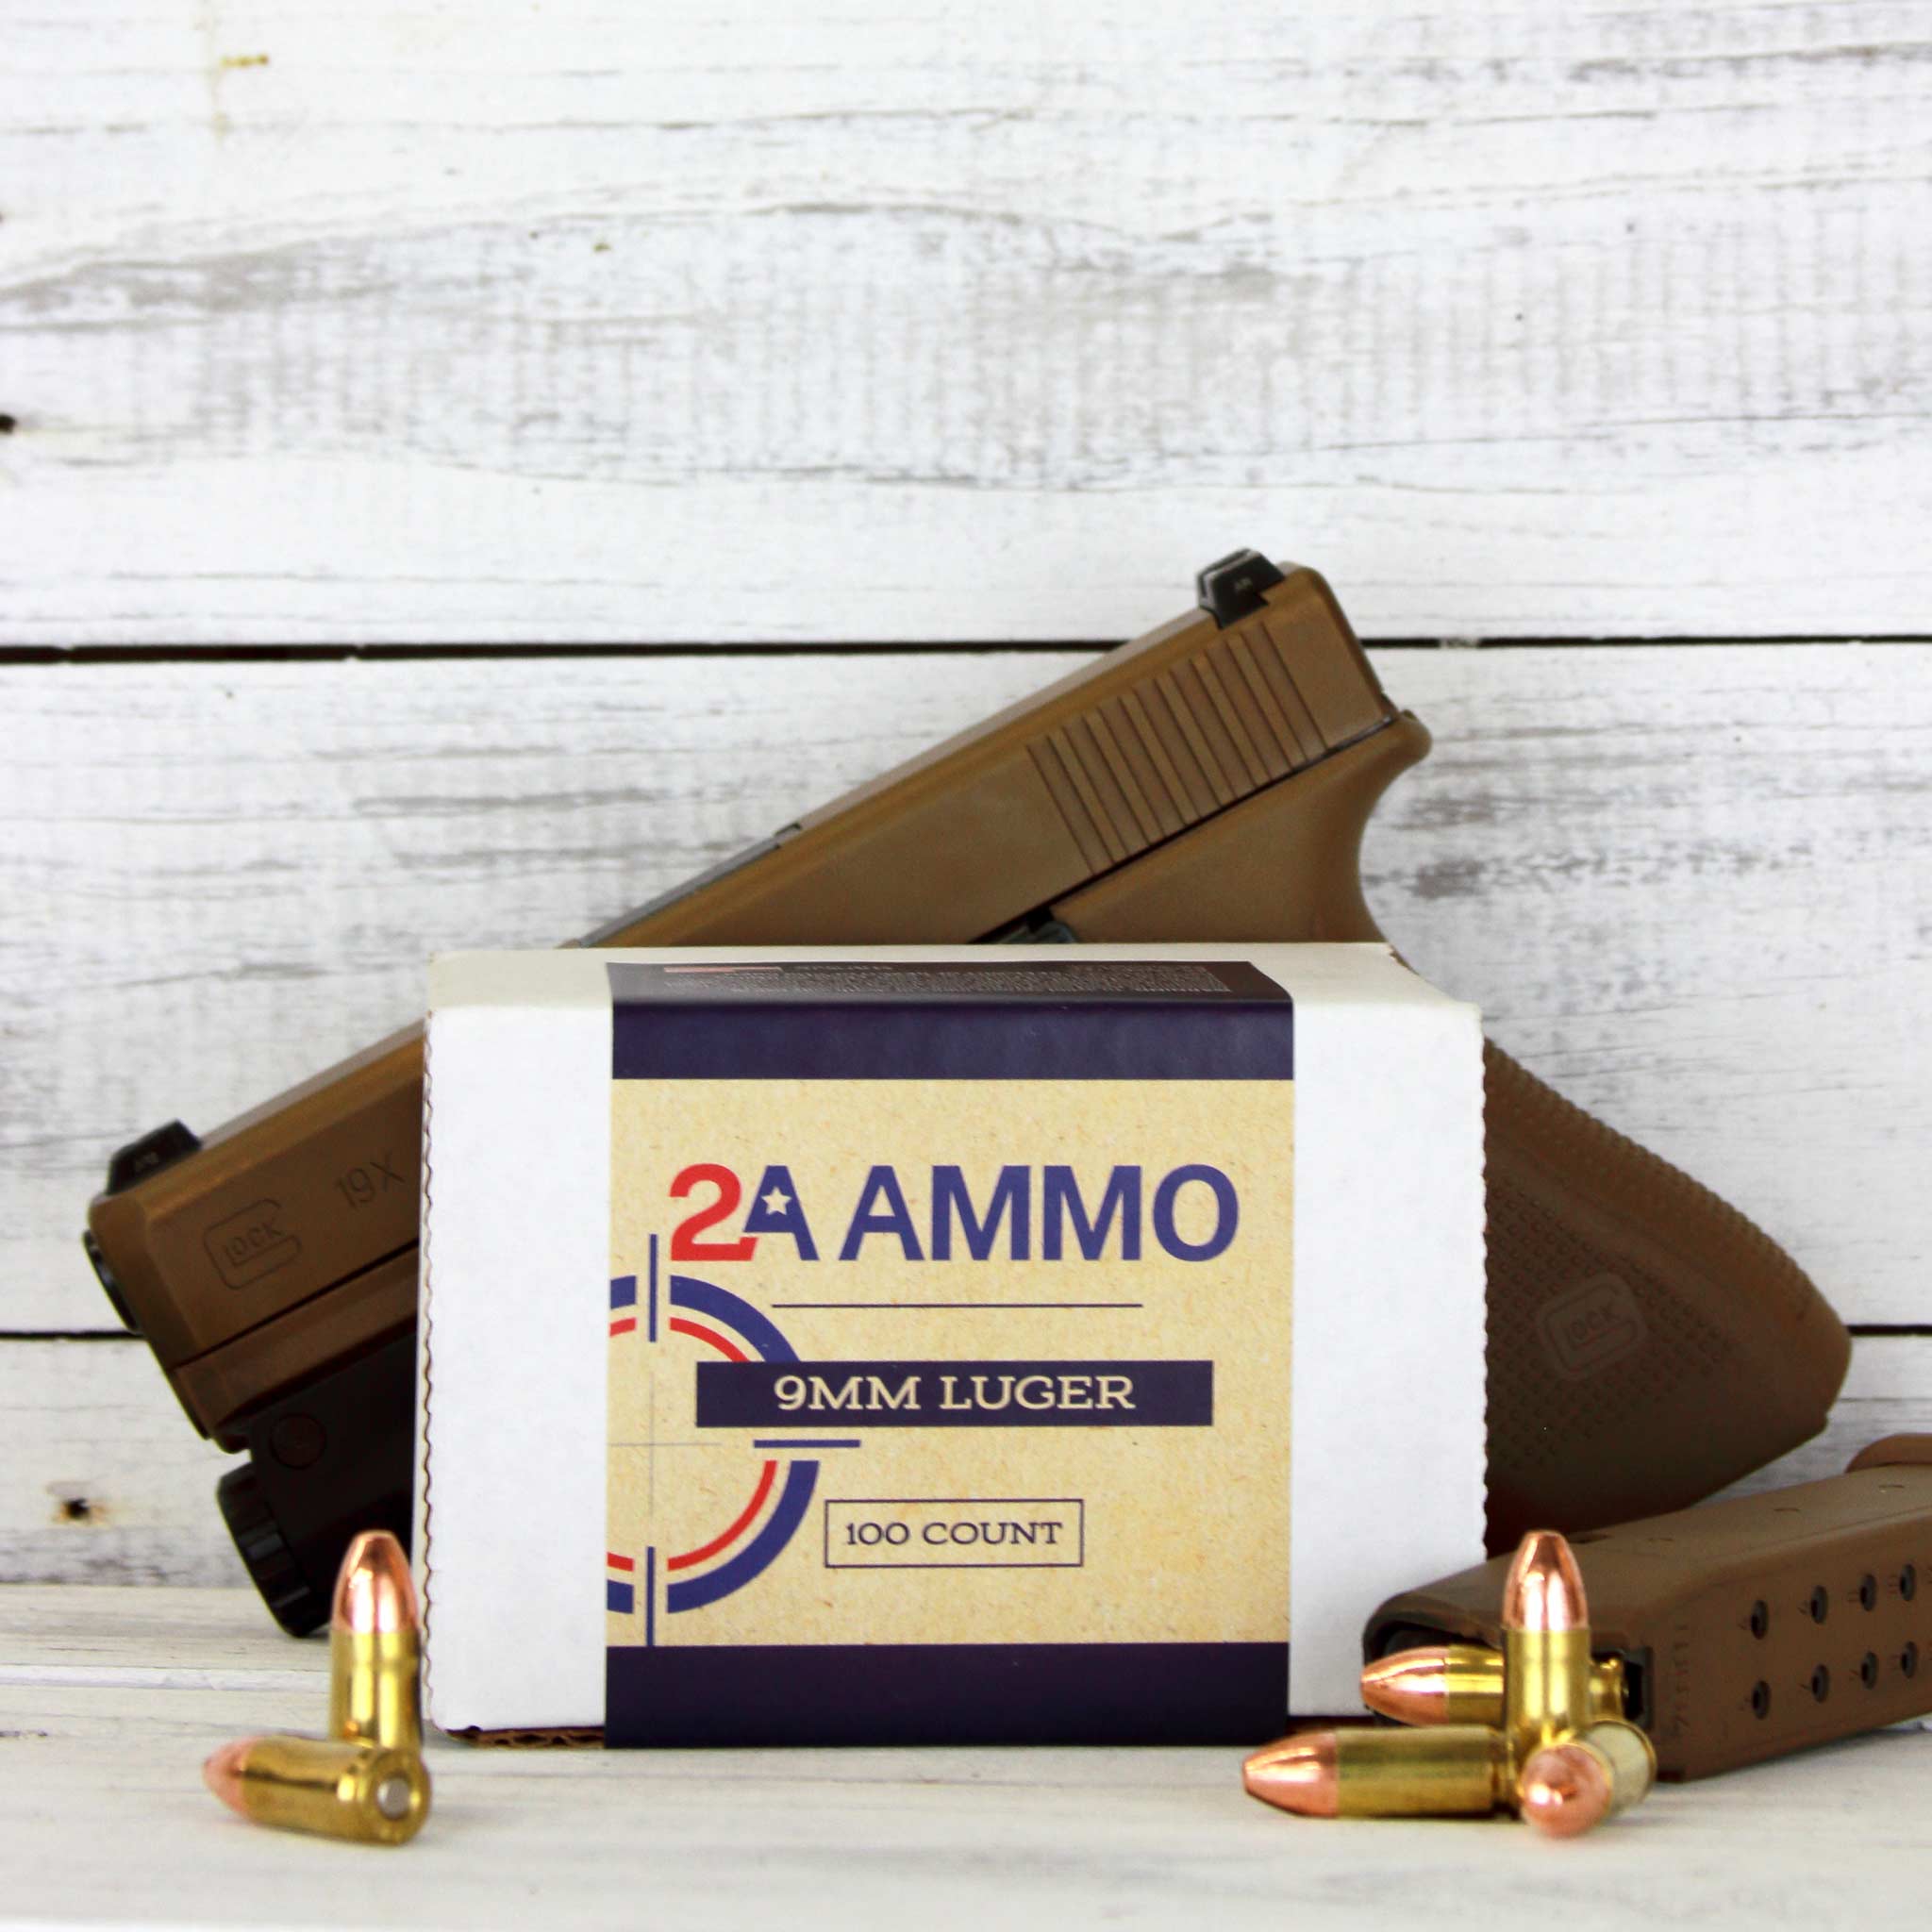 9 mm ammo - 100 rounds